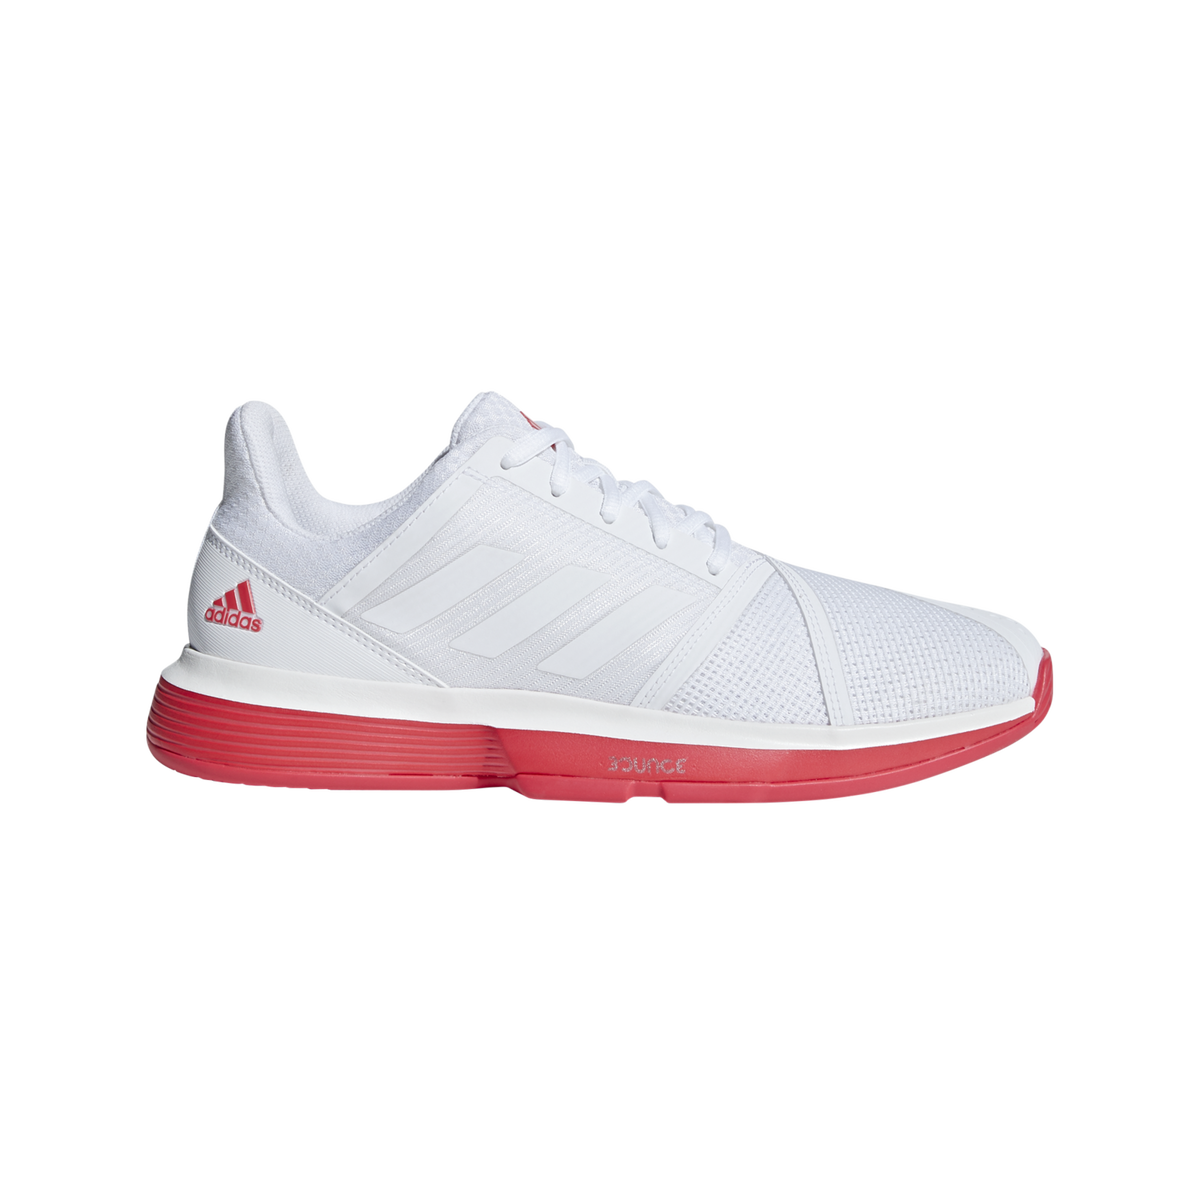 adidas CourtJam Bounce Men's Tennis Shoe - White/Red | PGA TOUR Superstore